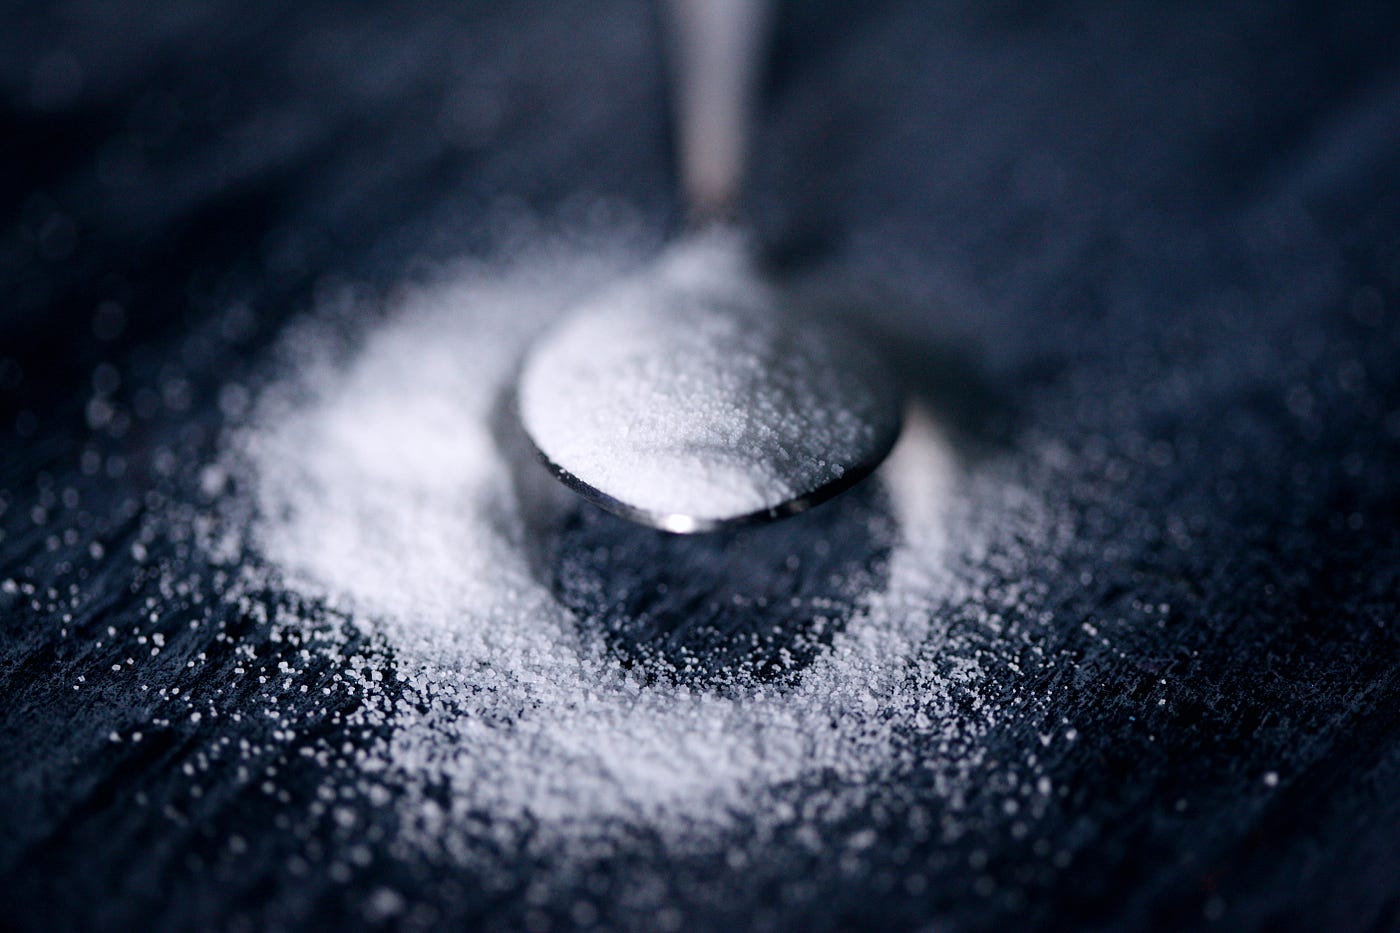 A spoon extends from the image top, a bit of sugar in it, but most of the sugar has spilled out onto a dark gray surface. Table sugar is composed of glucose and fructose.